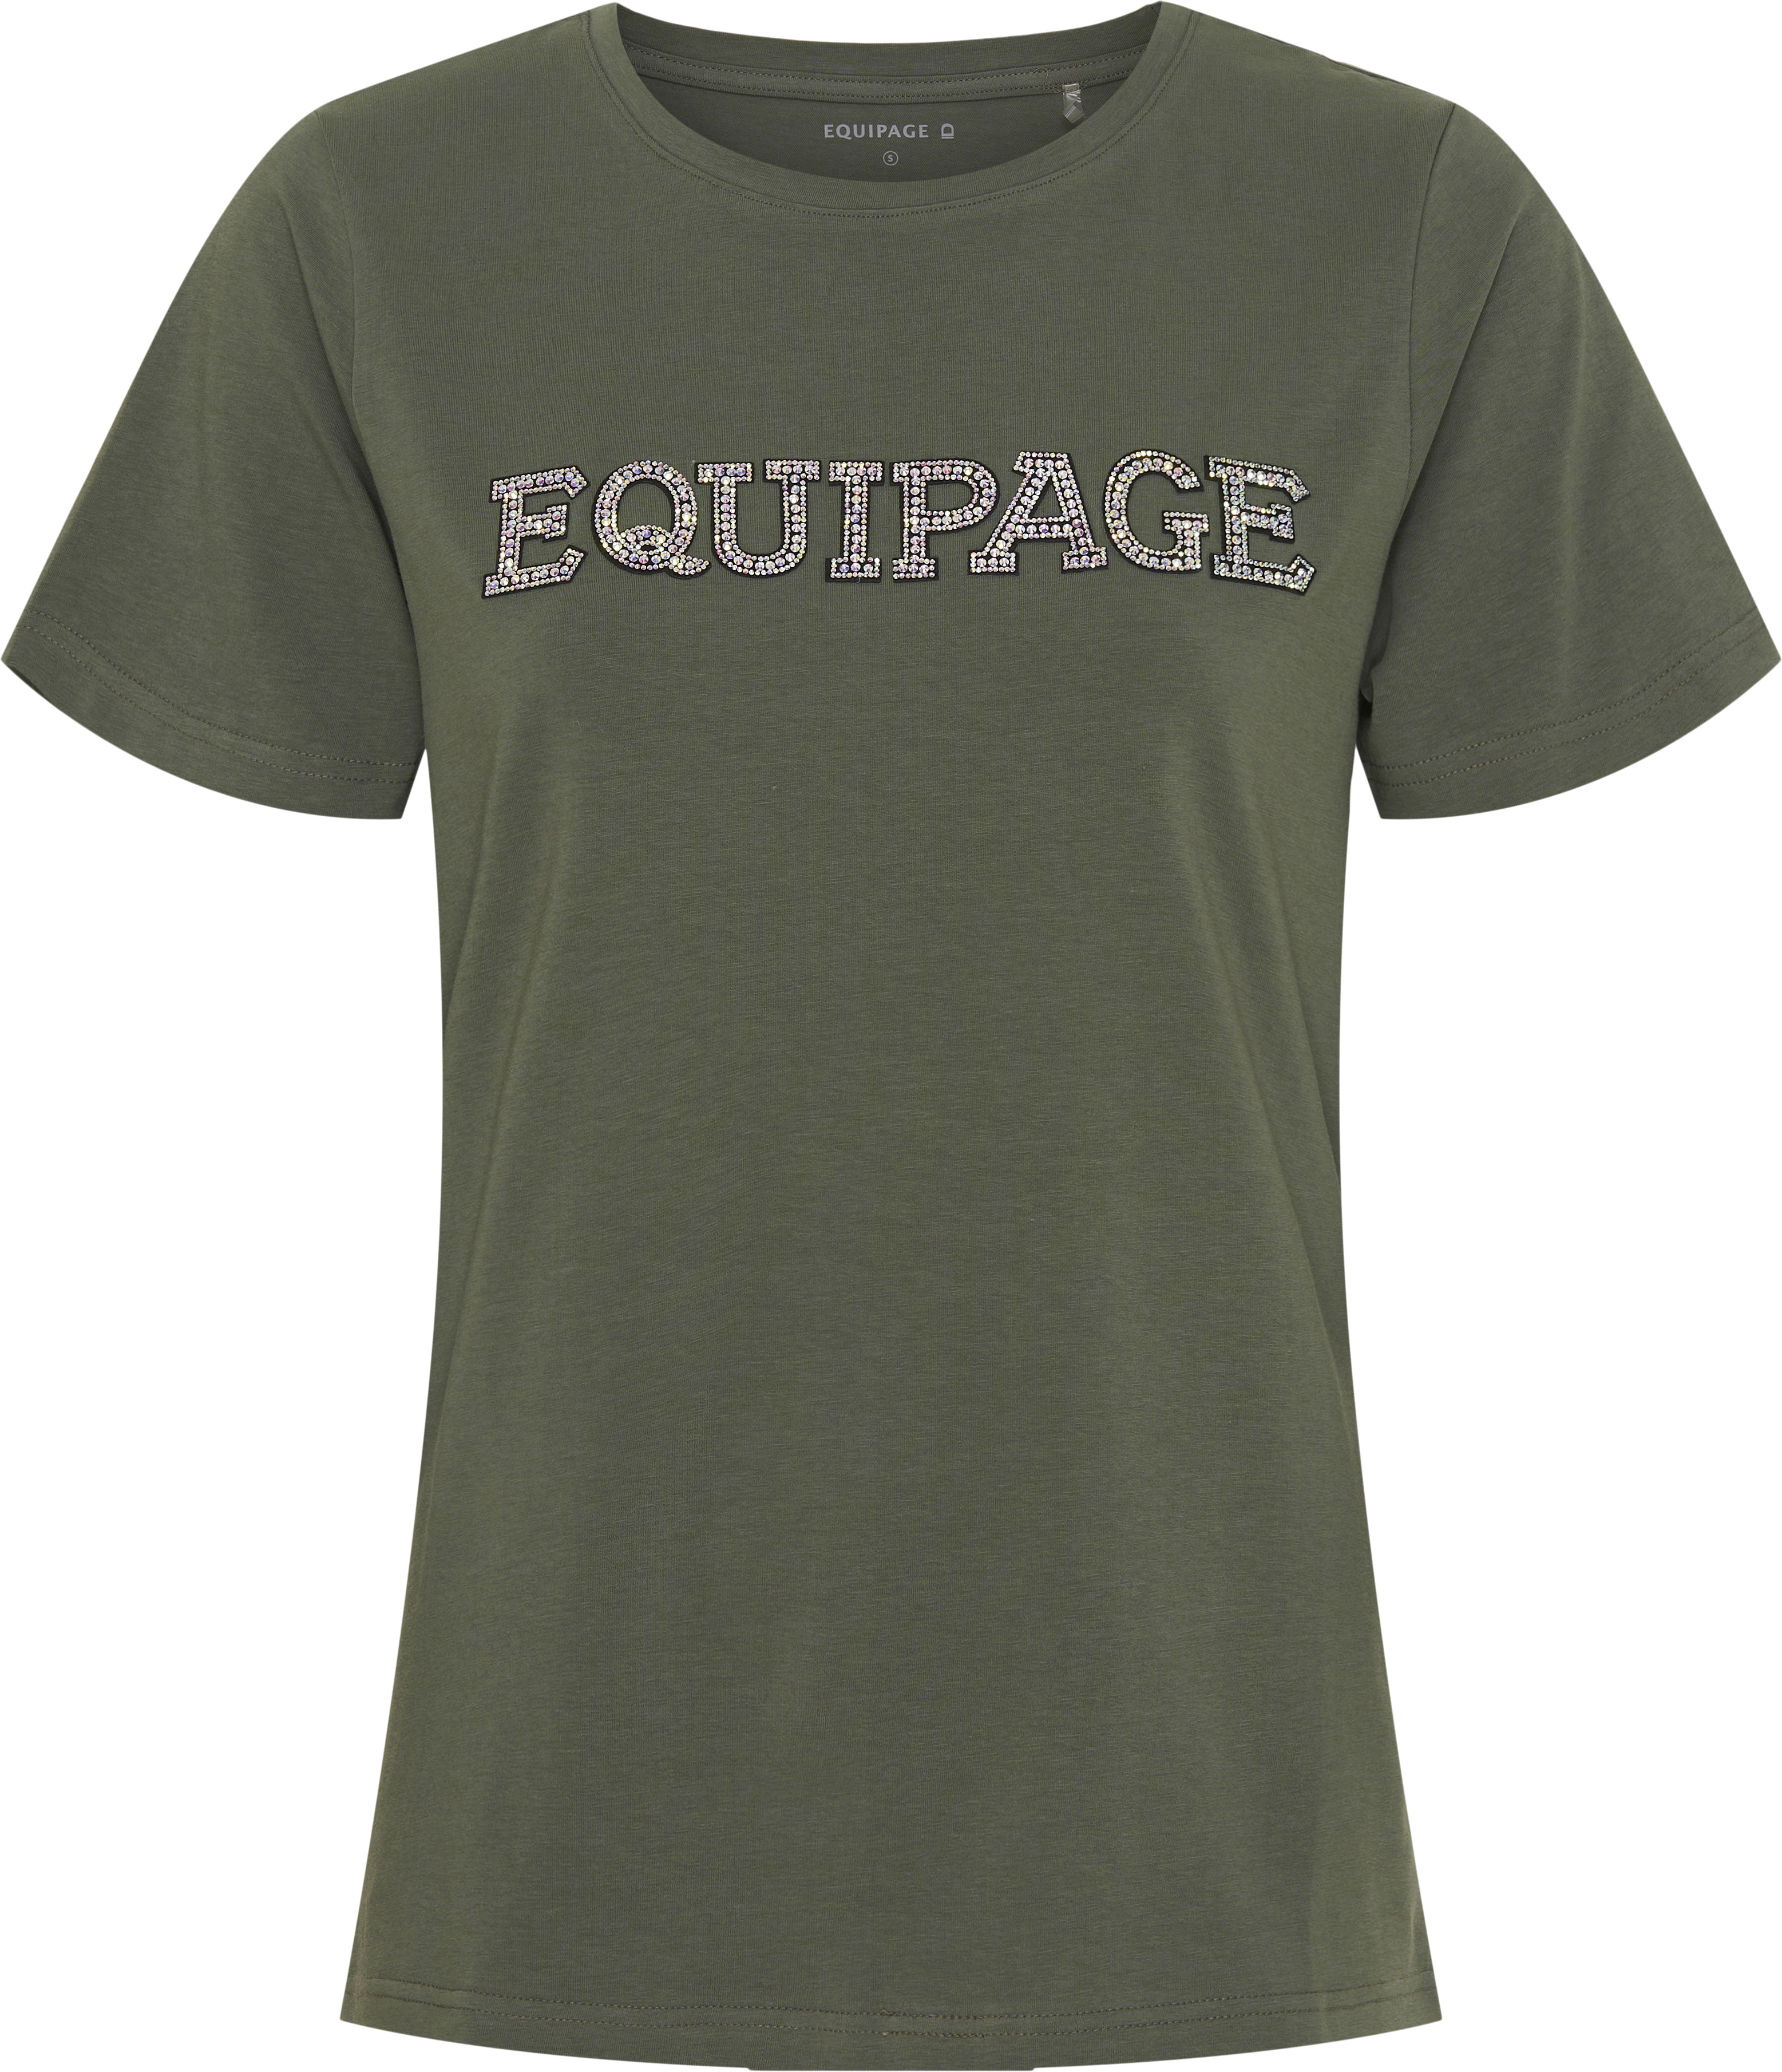 Equipage Melina T-Shirt - Forest (140)